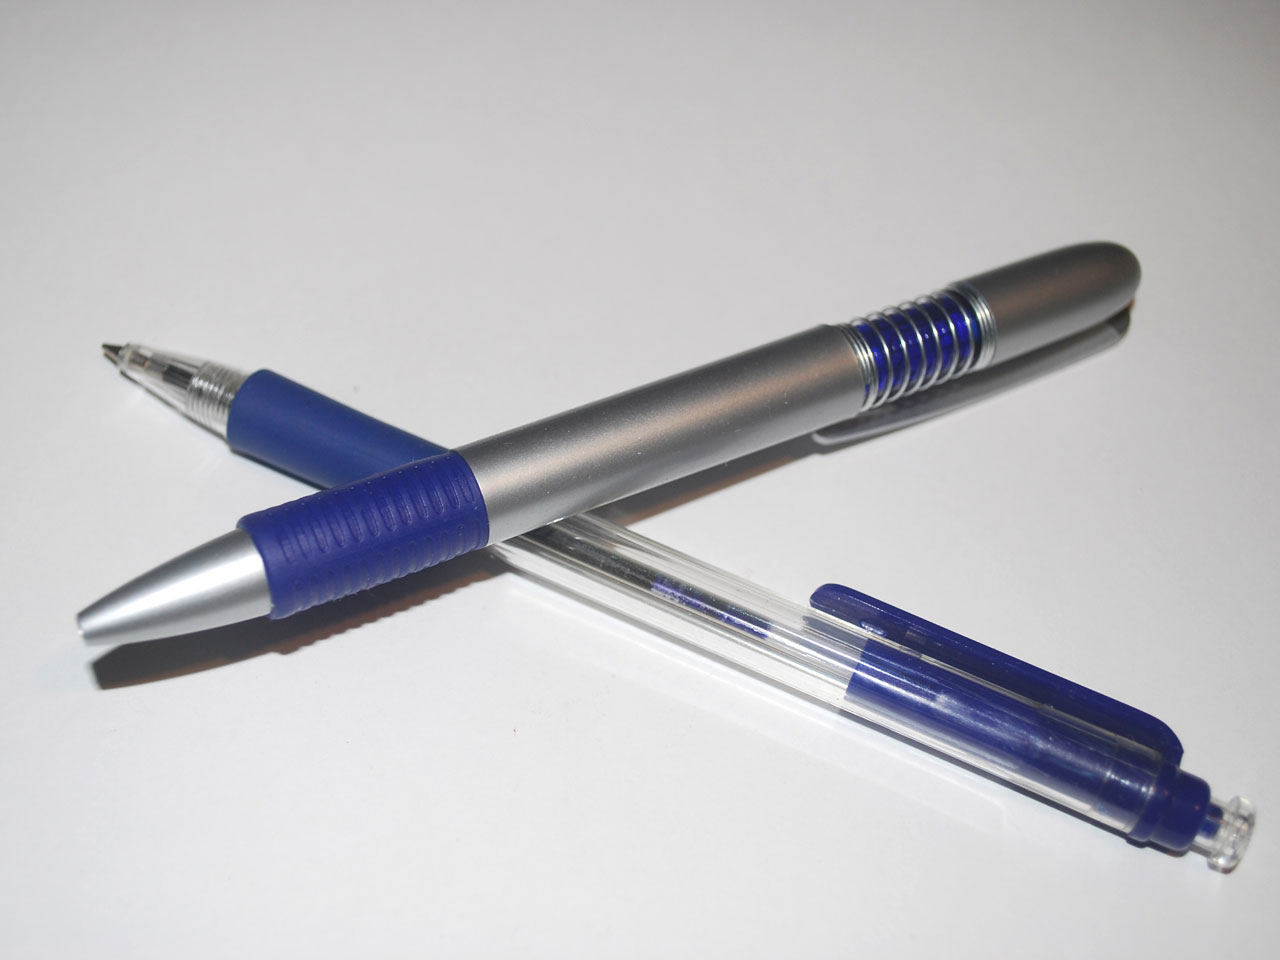 Two Pens